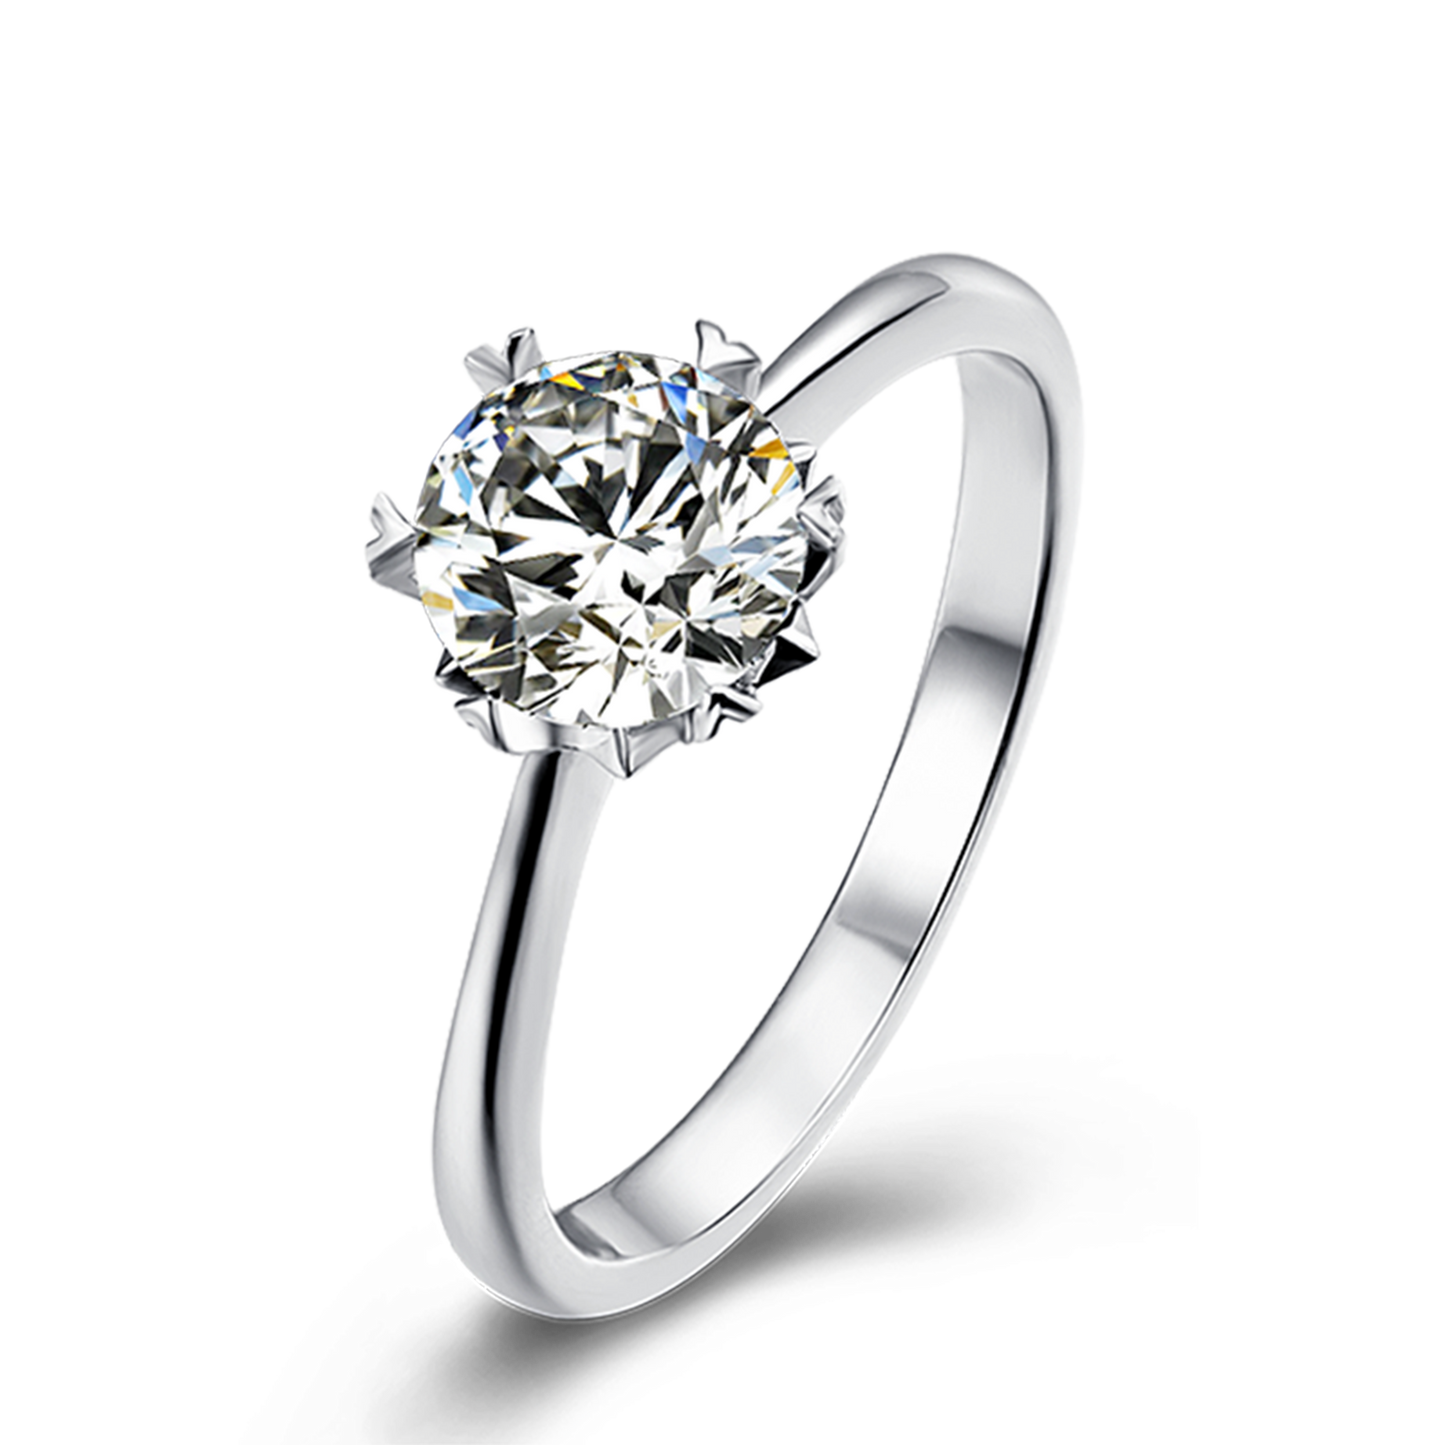 F001 Beautiful Round Cut 0.5/1 Carat Solitaire Engagement Ring In 925s Sterling Silver For Women